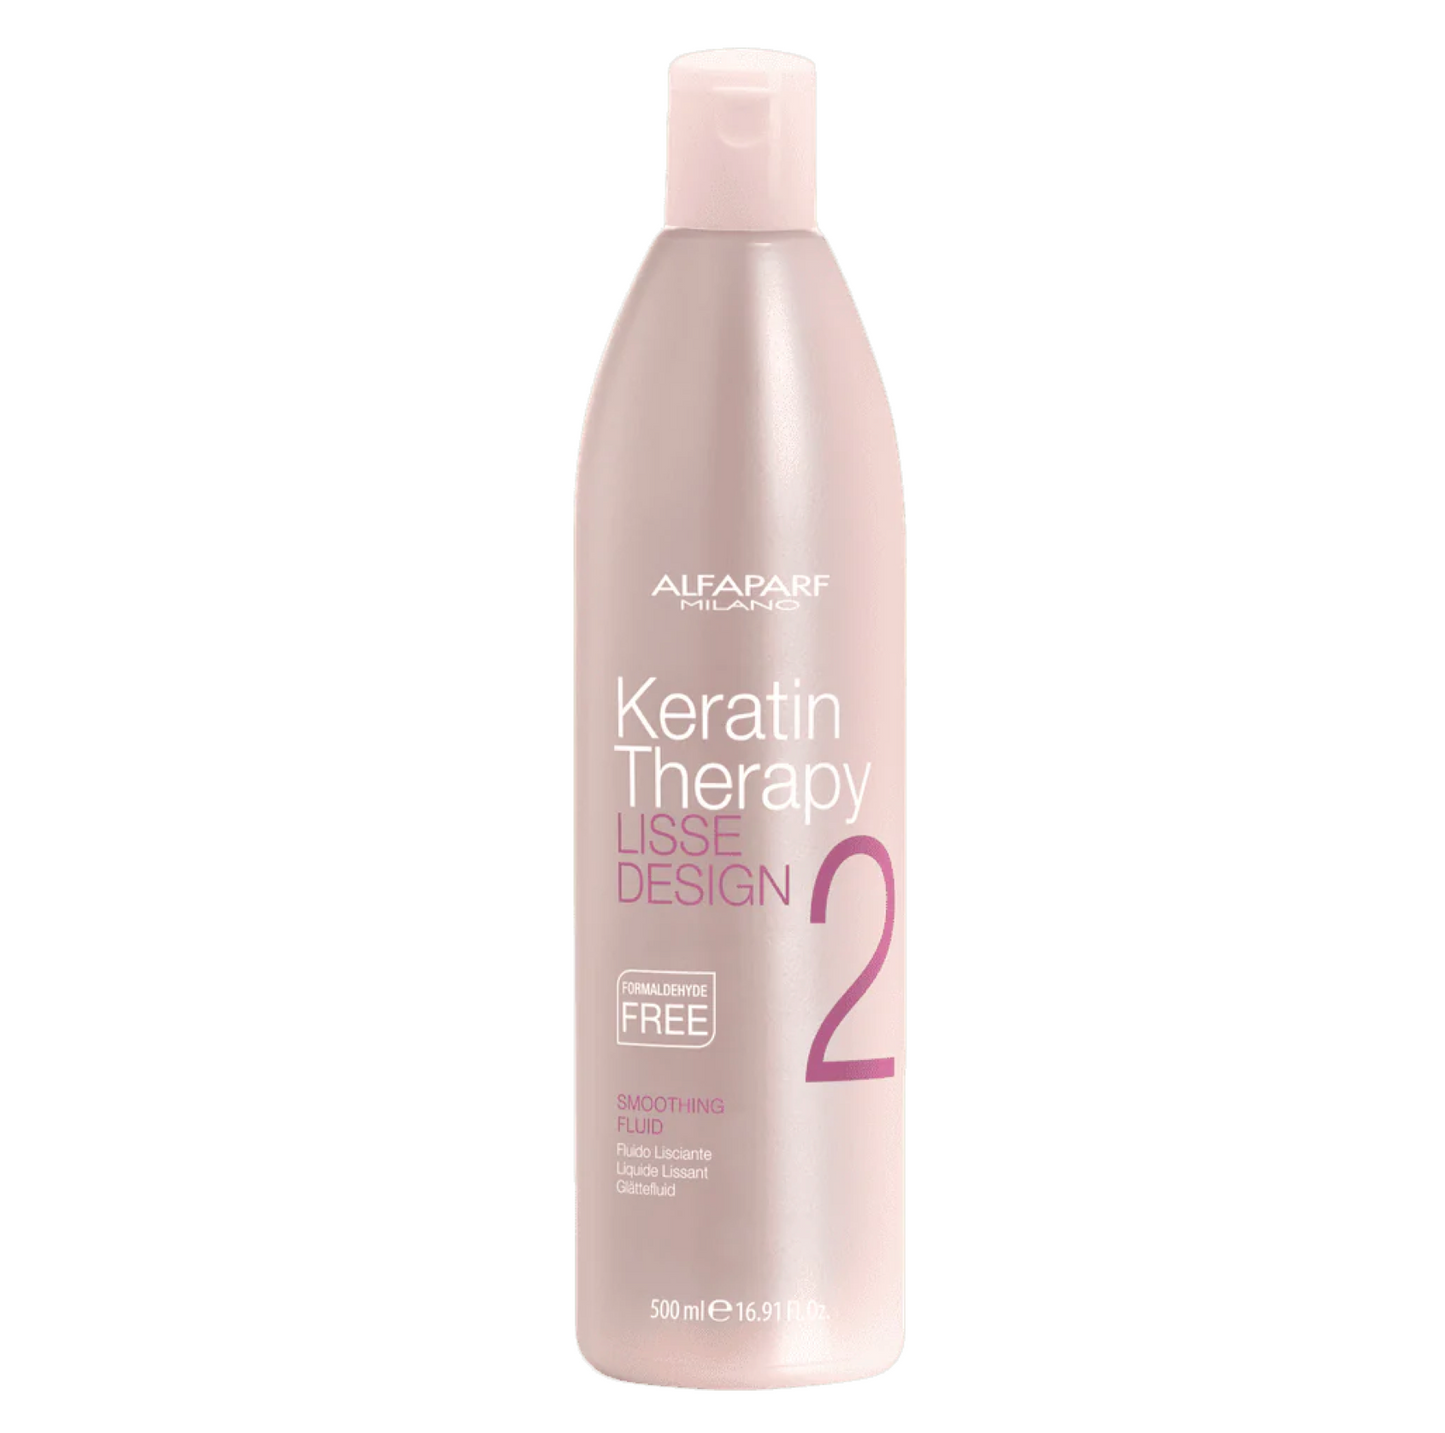 DUO ALFAPARF LISSE DESIGN KERATIN THERAPY Shampoo And Smoothing